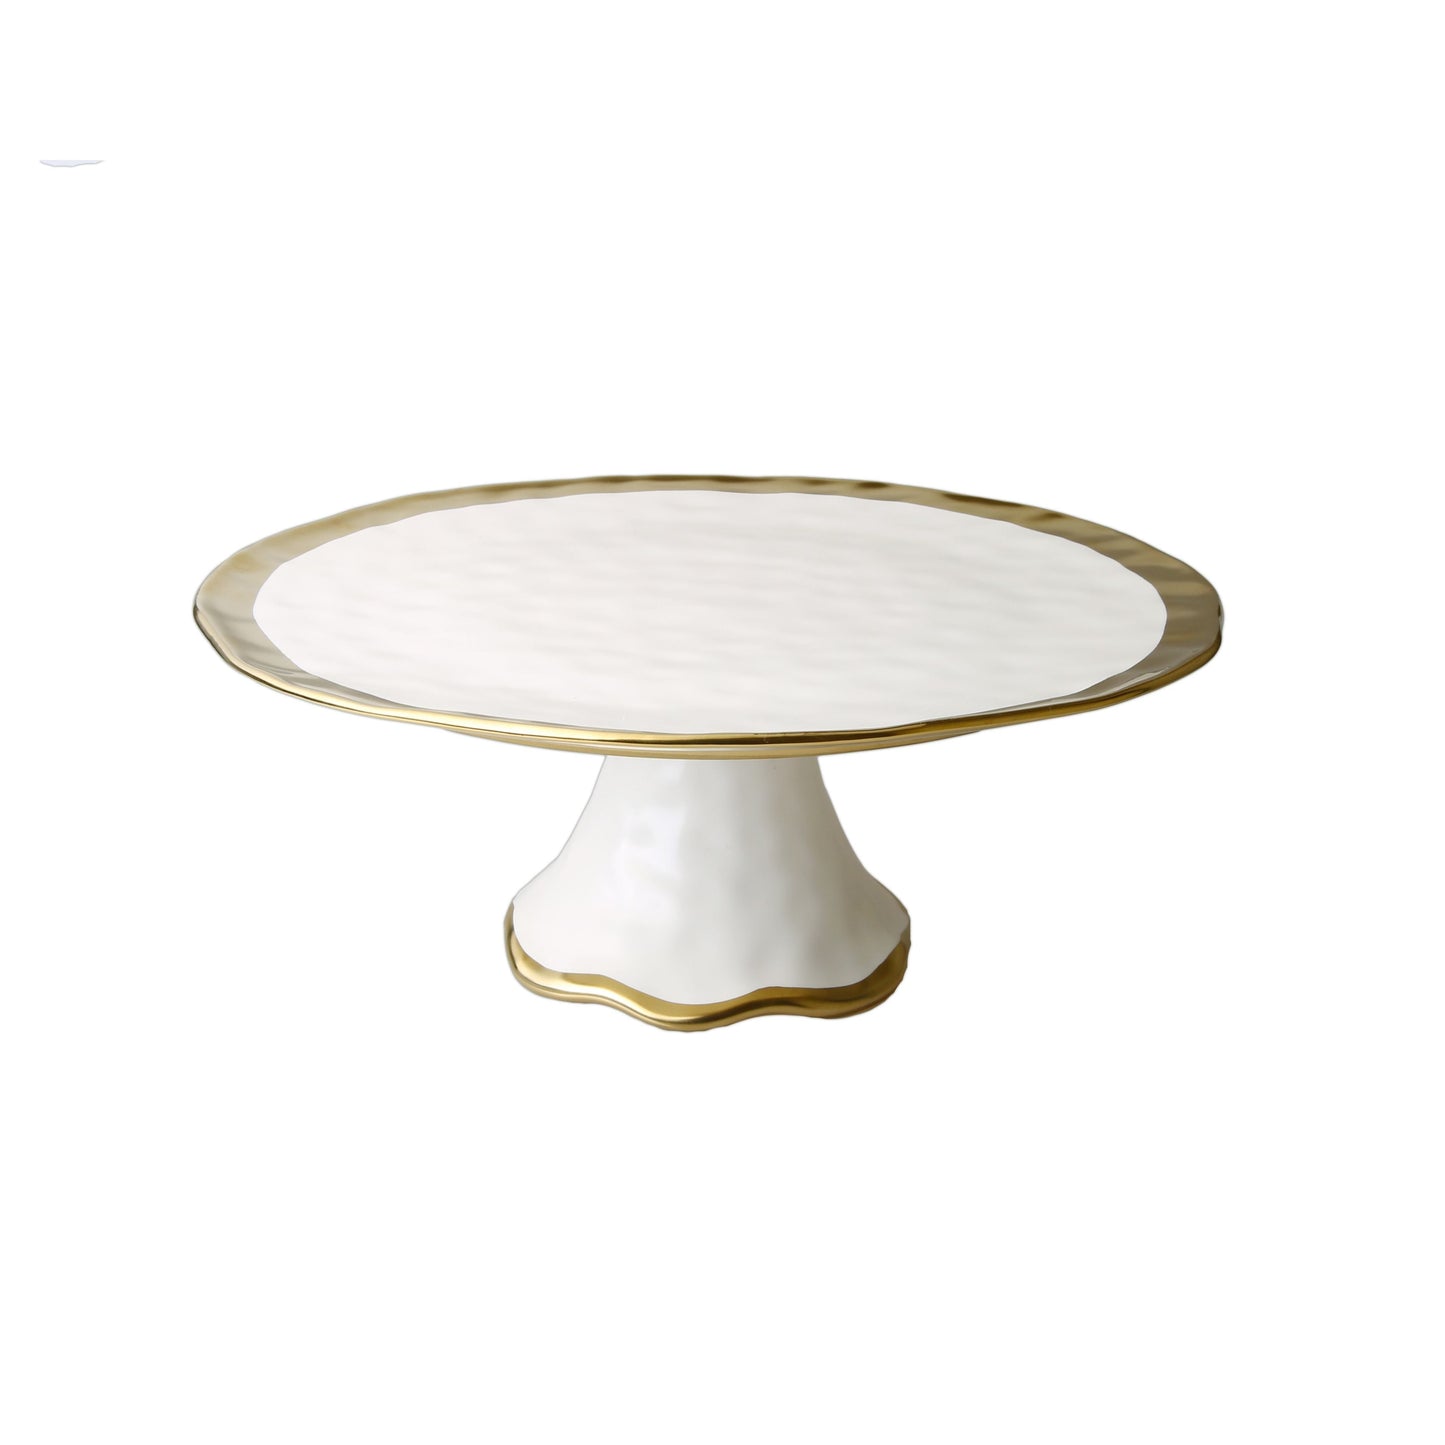 Classic Touch Decor Porcelain White Cake Stand Gold Border, 11.75"